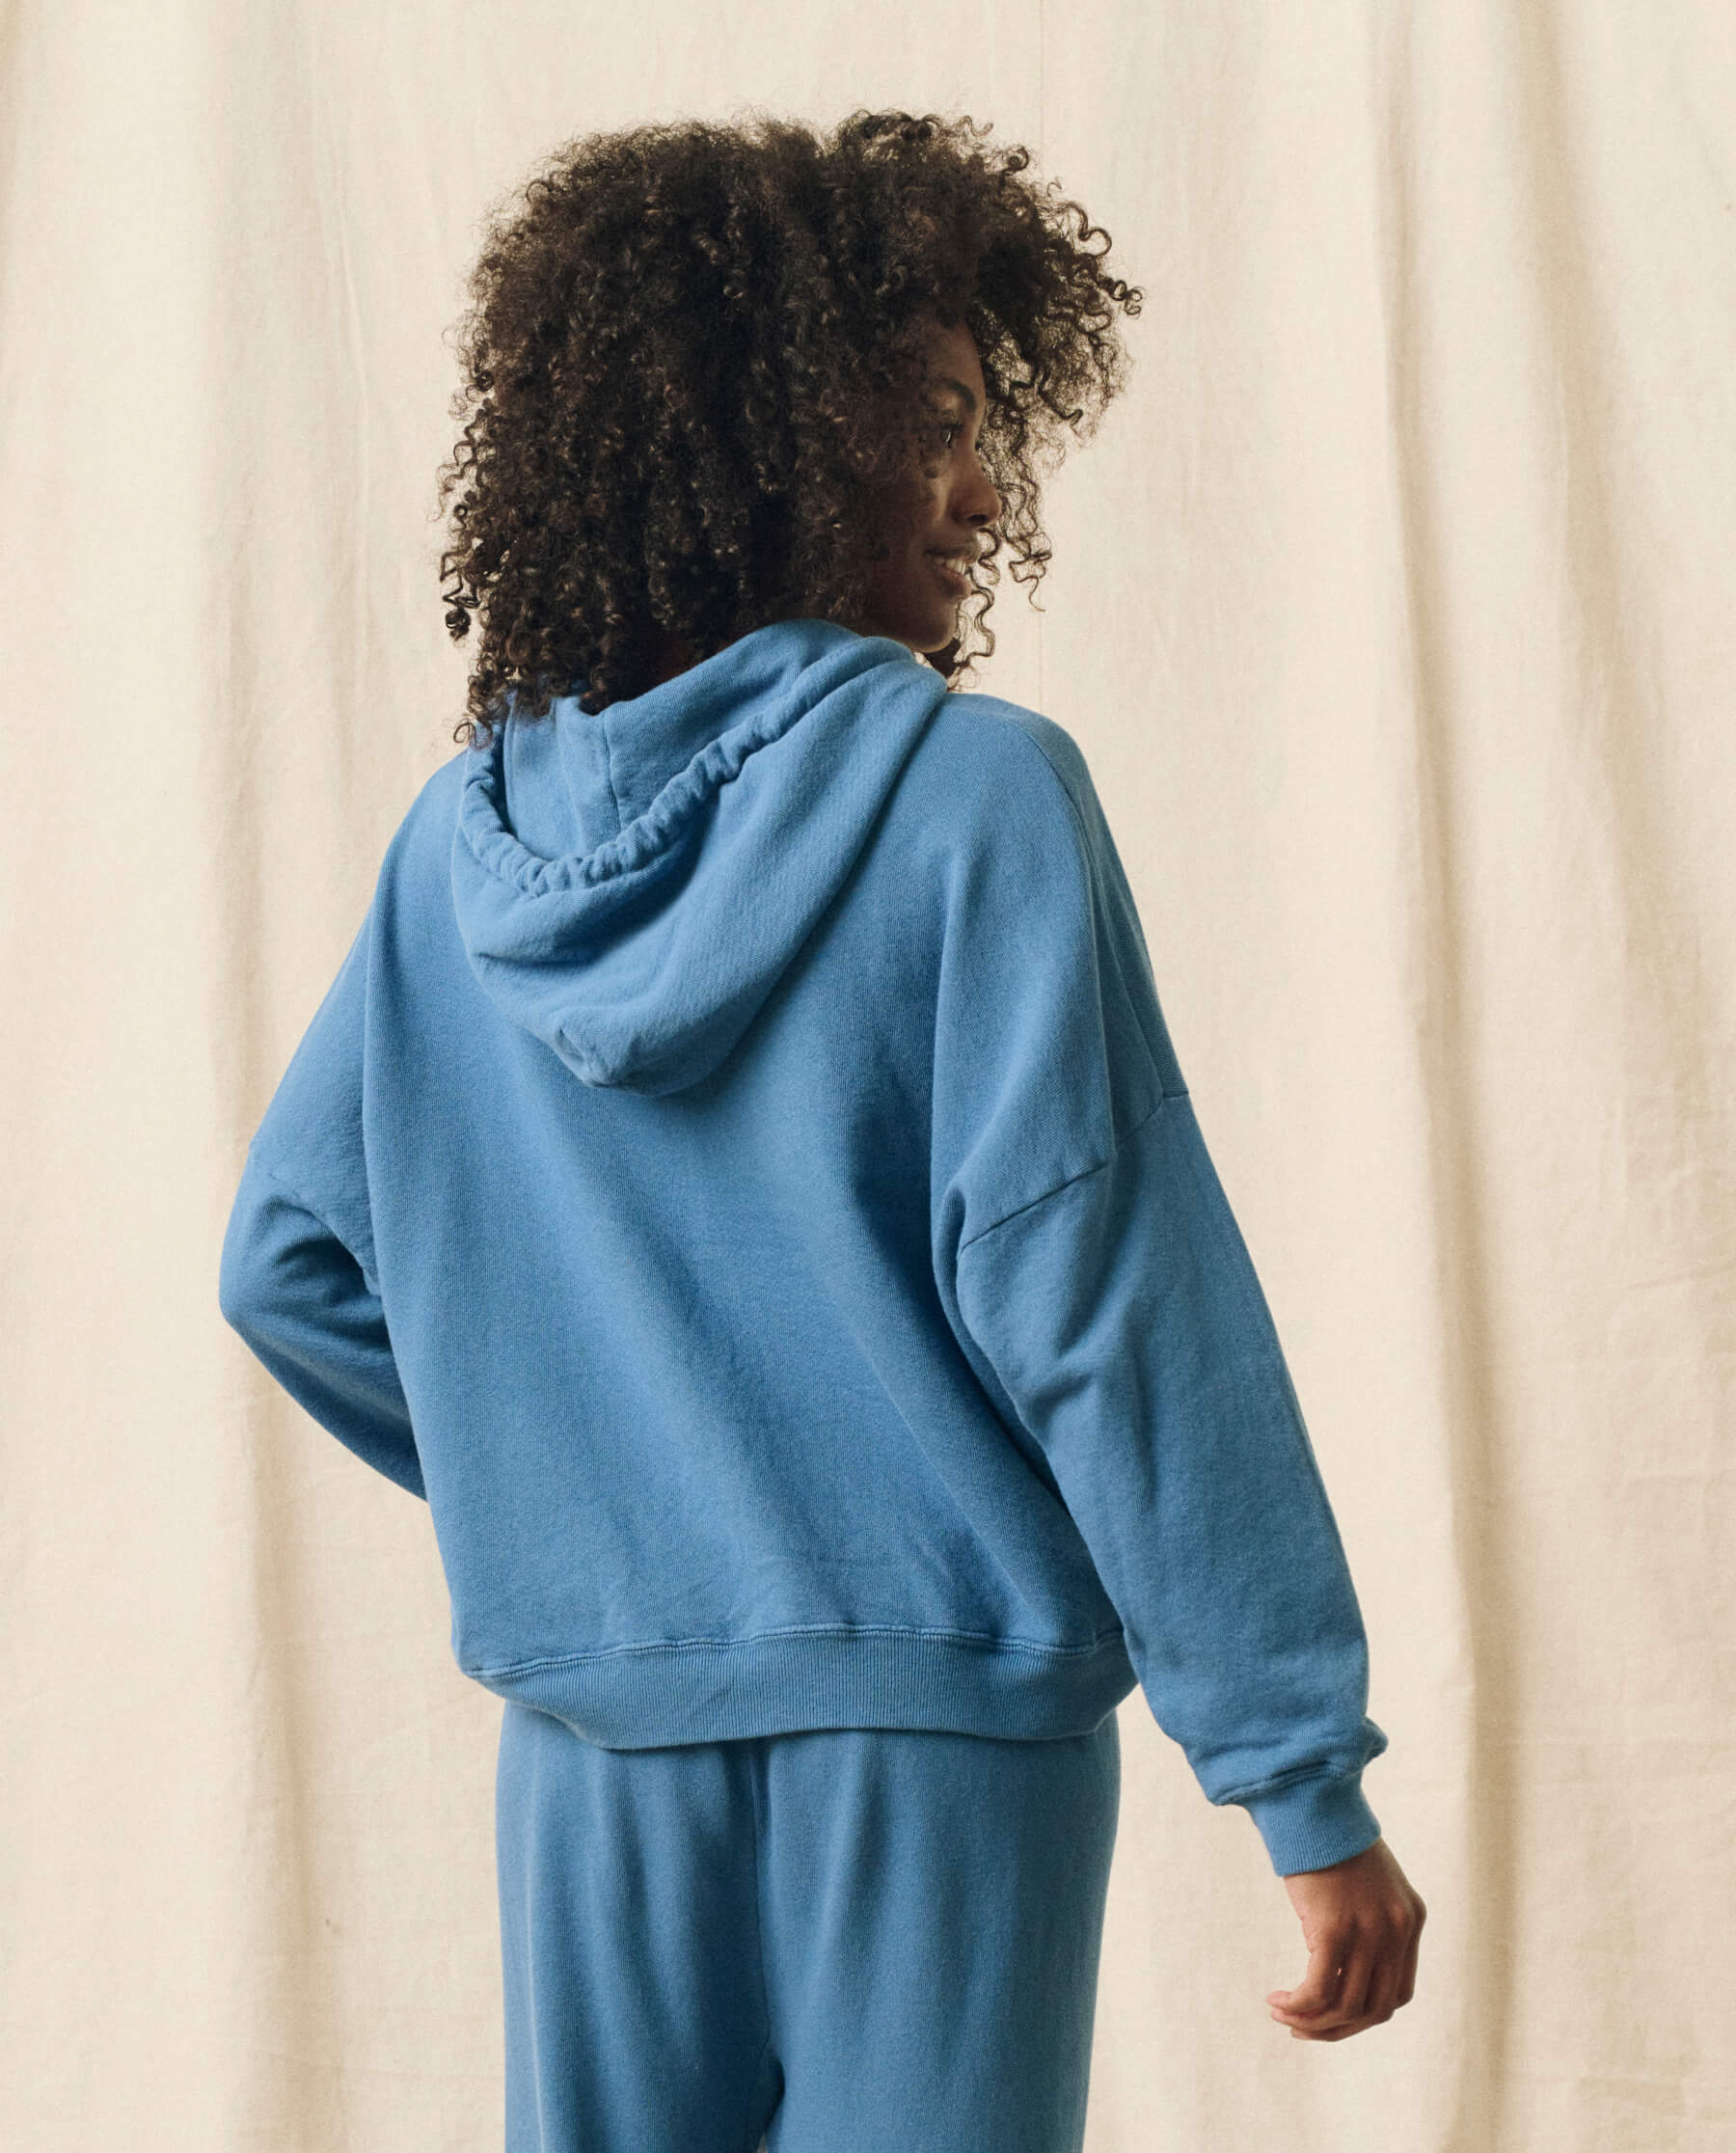 The Teammate Hoodie. Solid -- Glacier Blue SWEATSHIRTS THE GREAT. HOL 23 KNITS